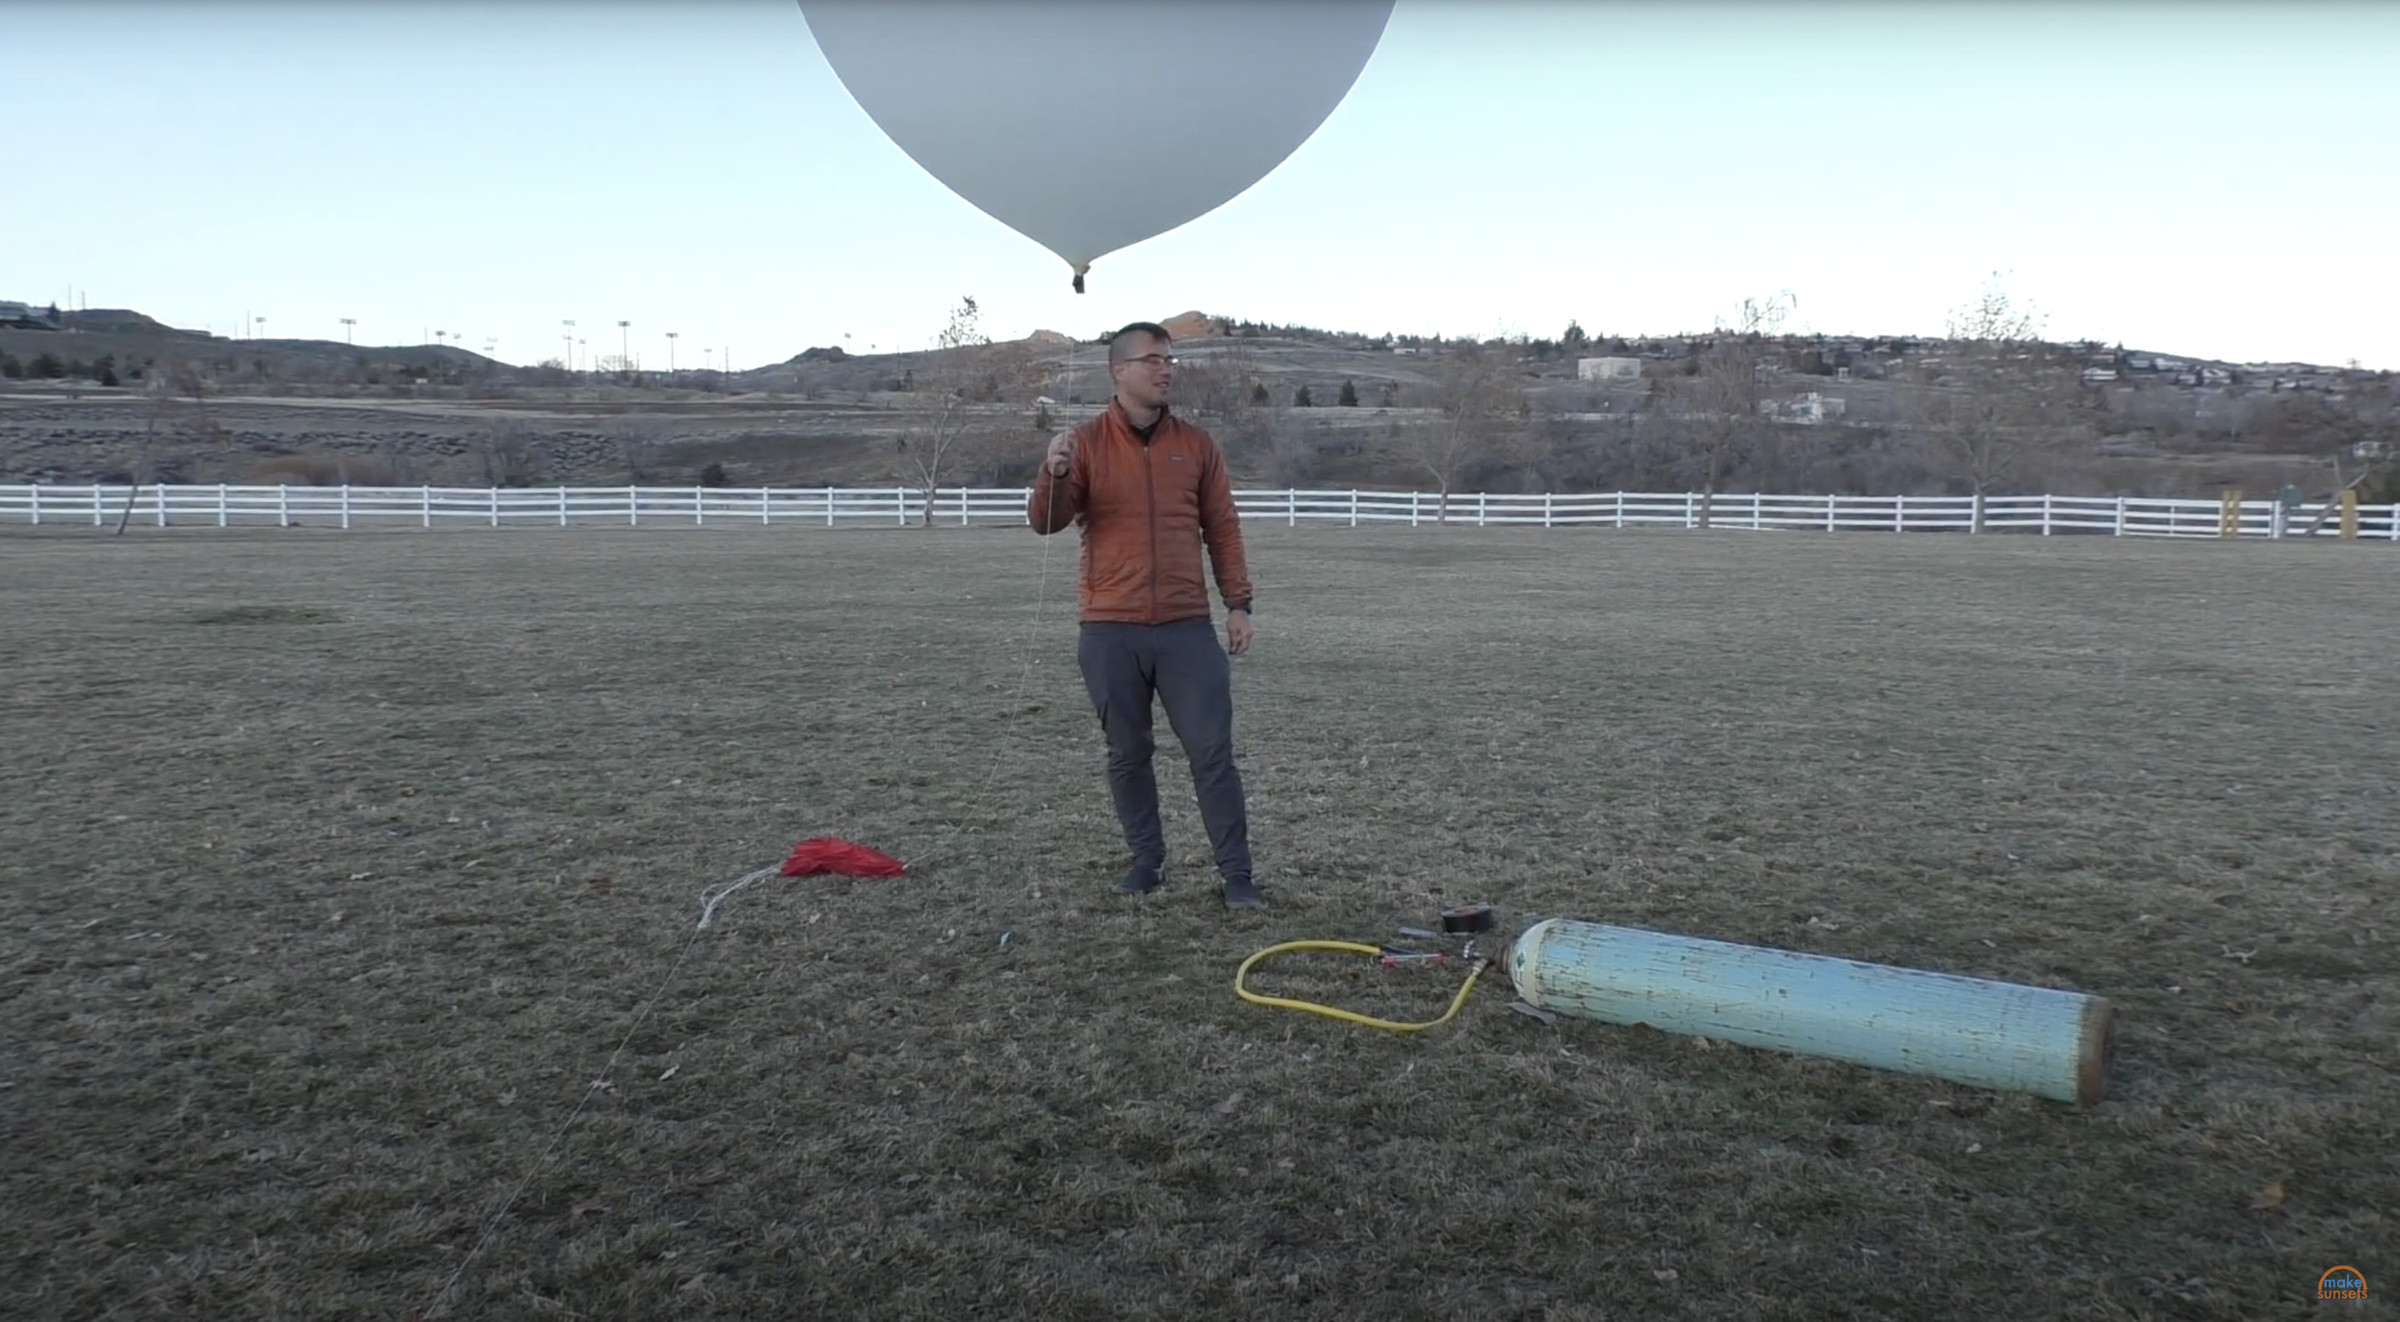 A man stands in the middle of a grassy field carrying a large white weather balloon.